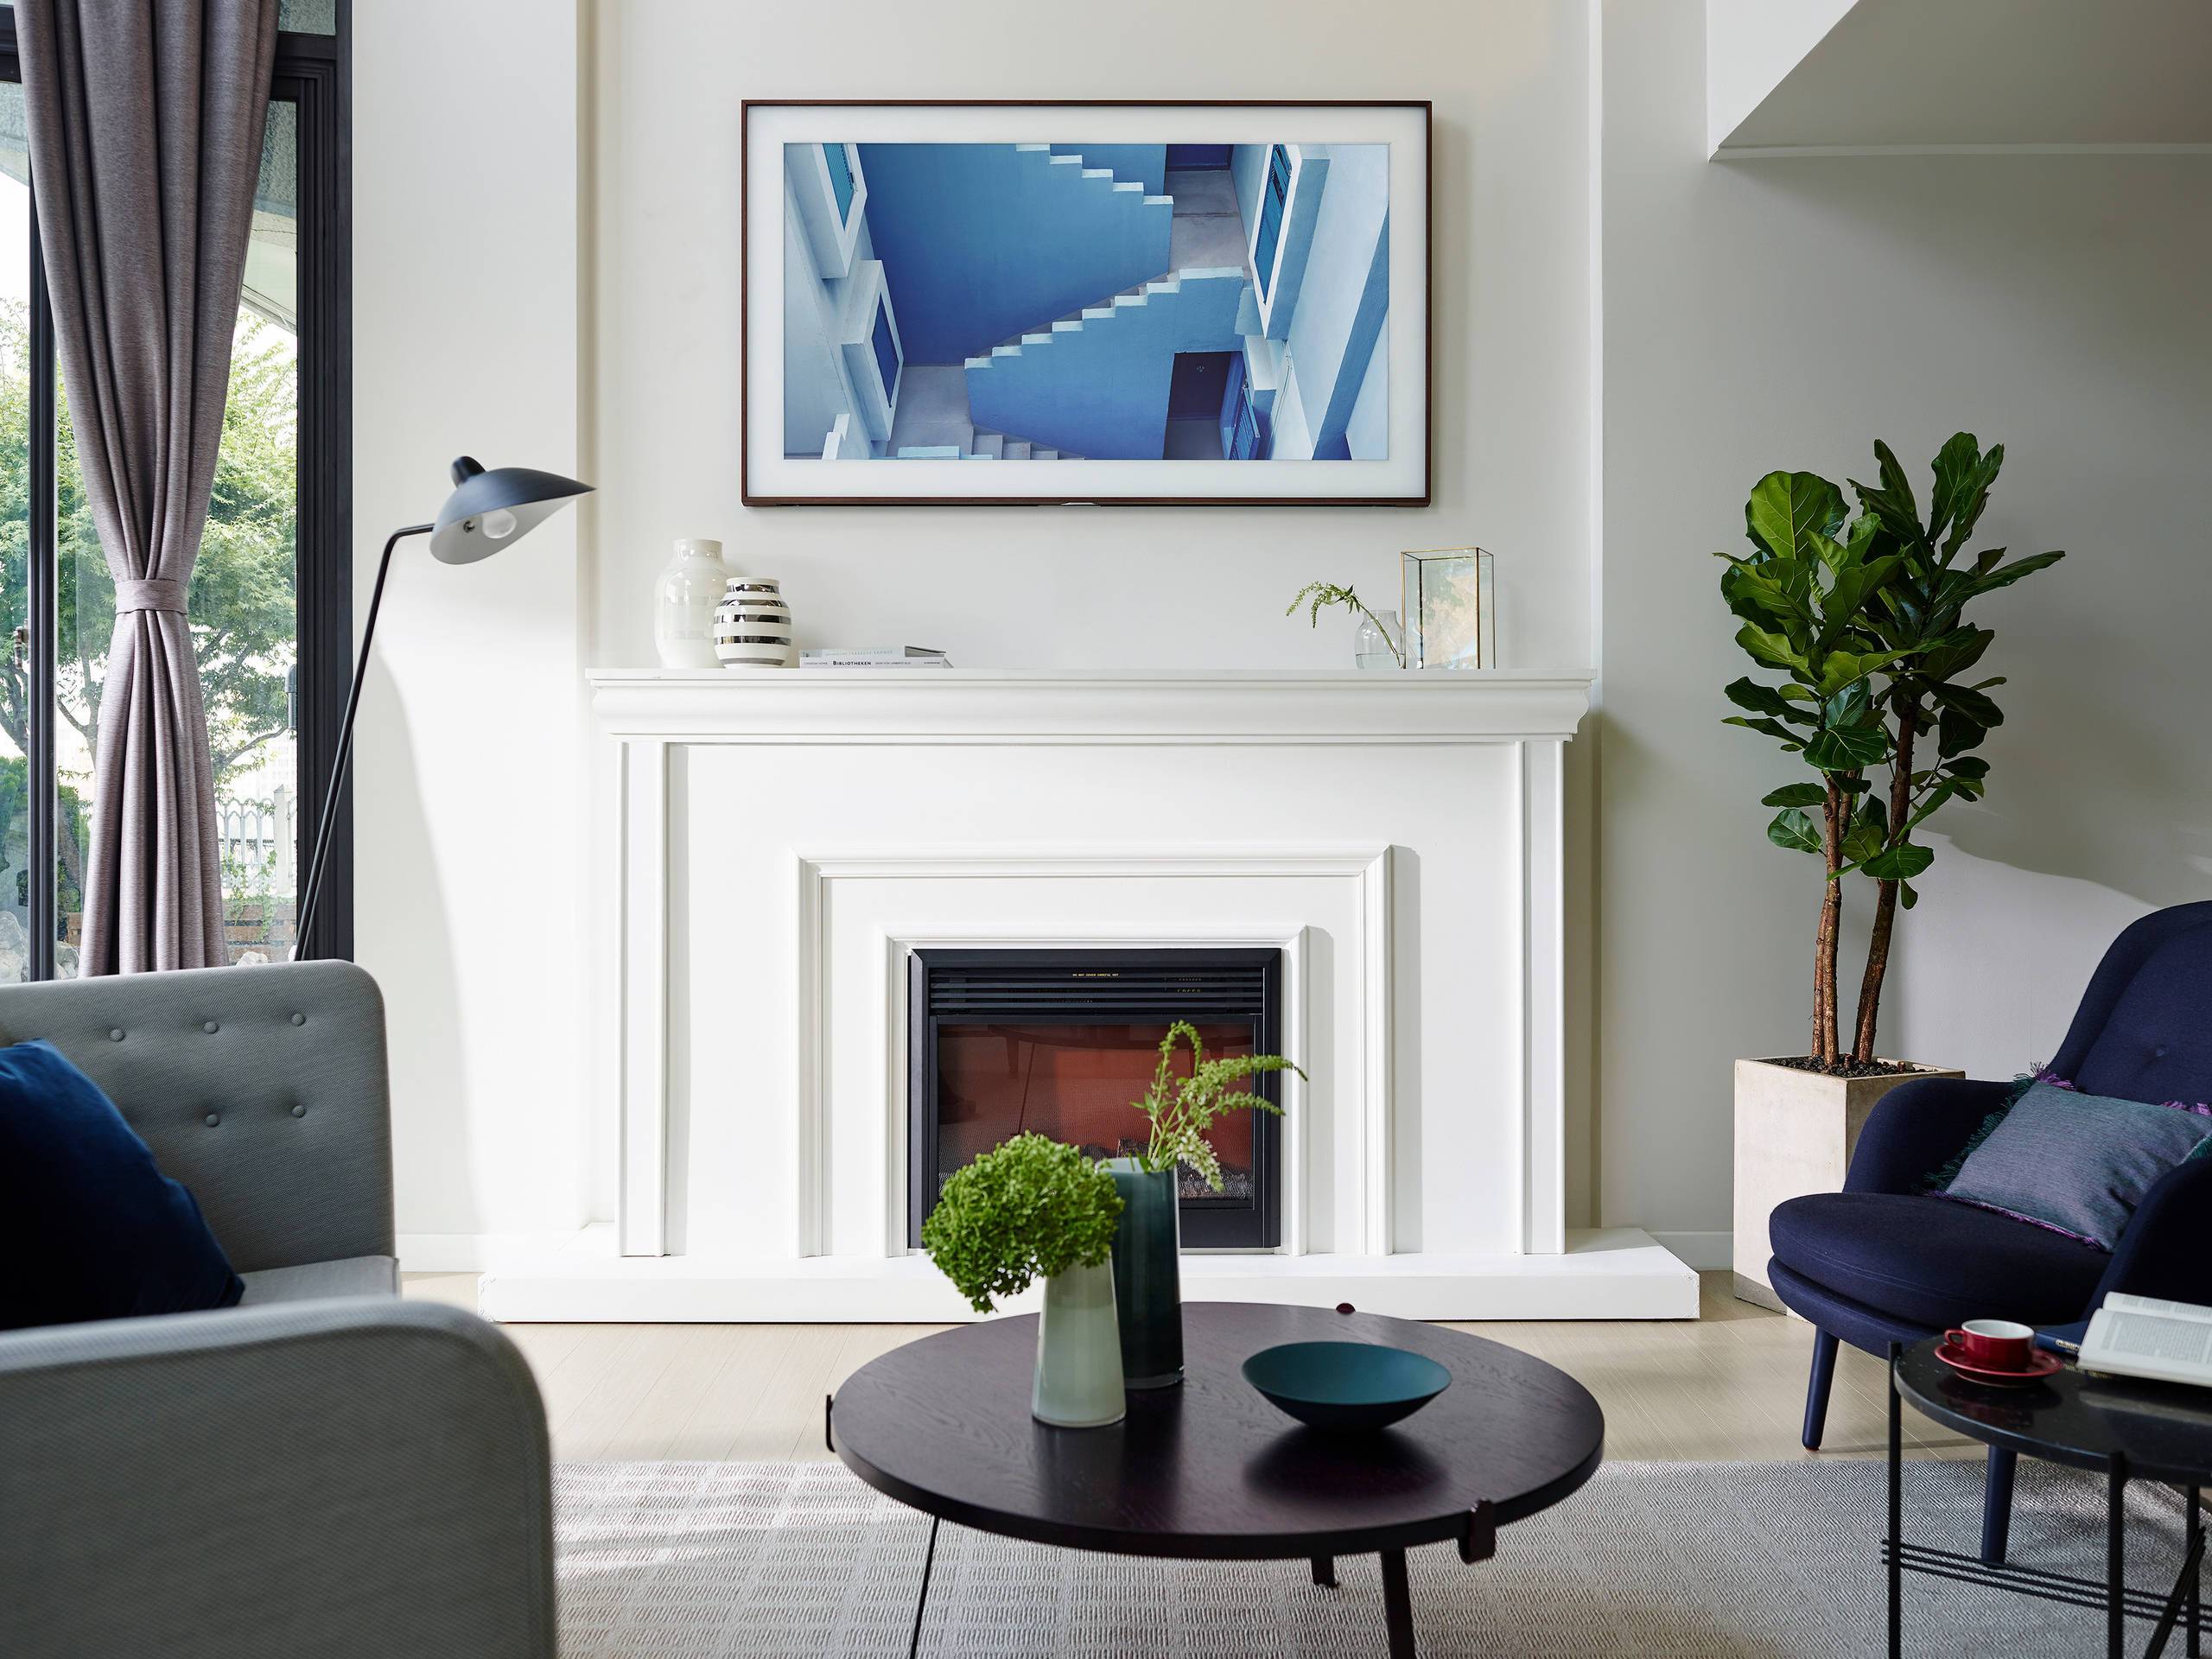 Innovative TV that turns into artwork (from Houzz)